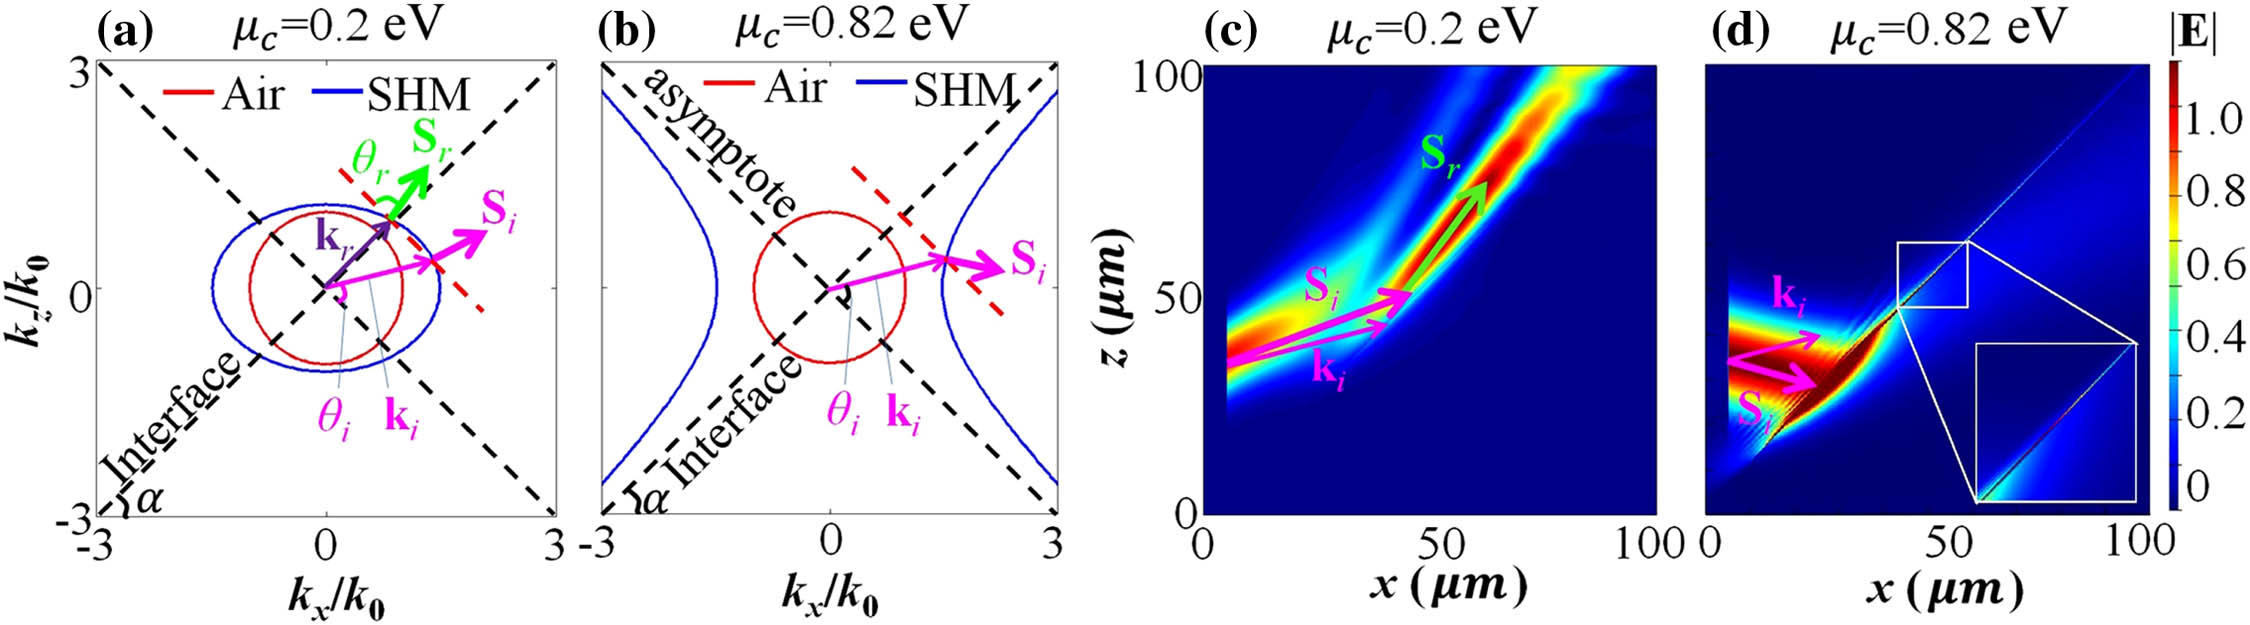 IFC analysis and simulation results for the optical switch at θi=60° and f=25 THz. (a), (c) Switch-off state (μc=0.2 eV). (b), (d) Switch-on state (μc=0.82 eV). The inset shows the enlargement of the energy distribution in the denoted square area.